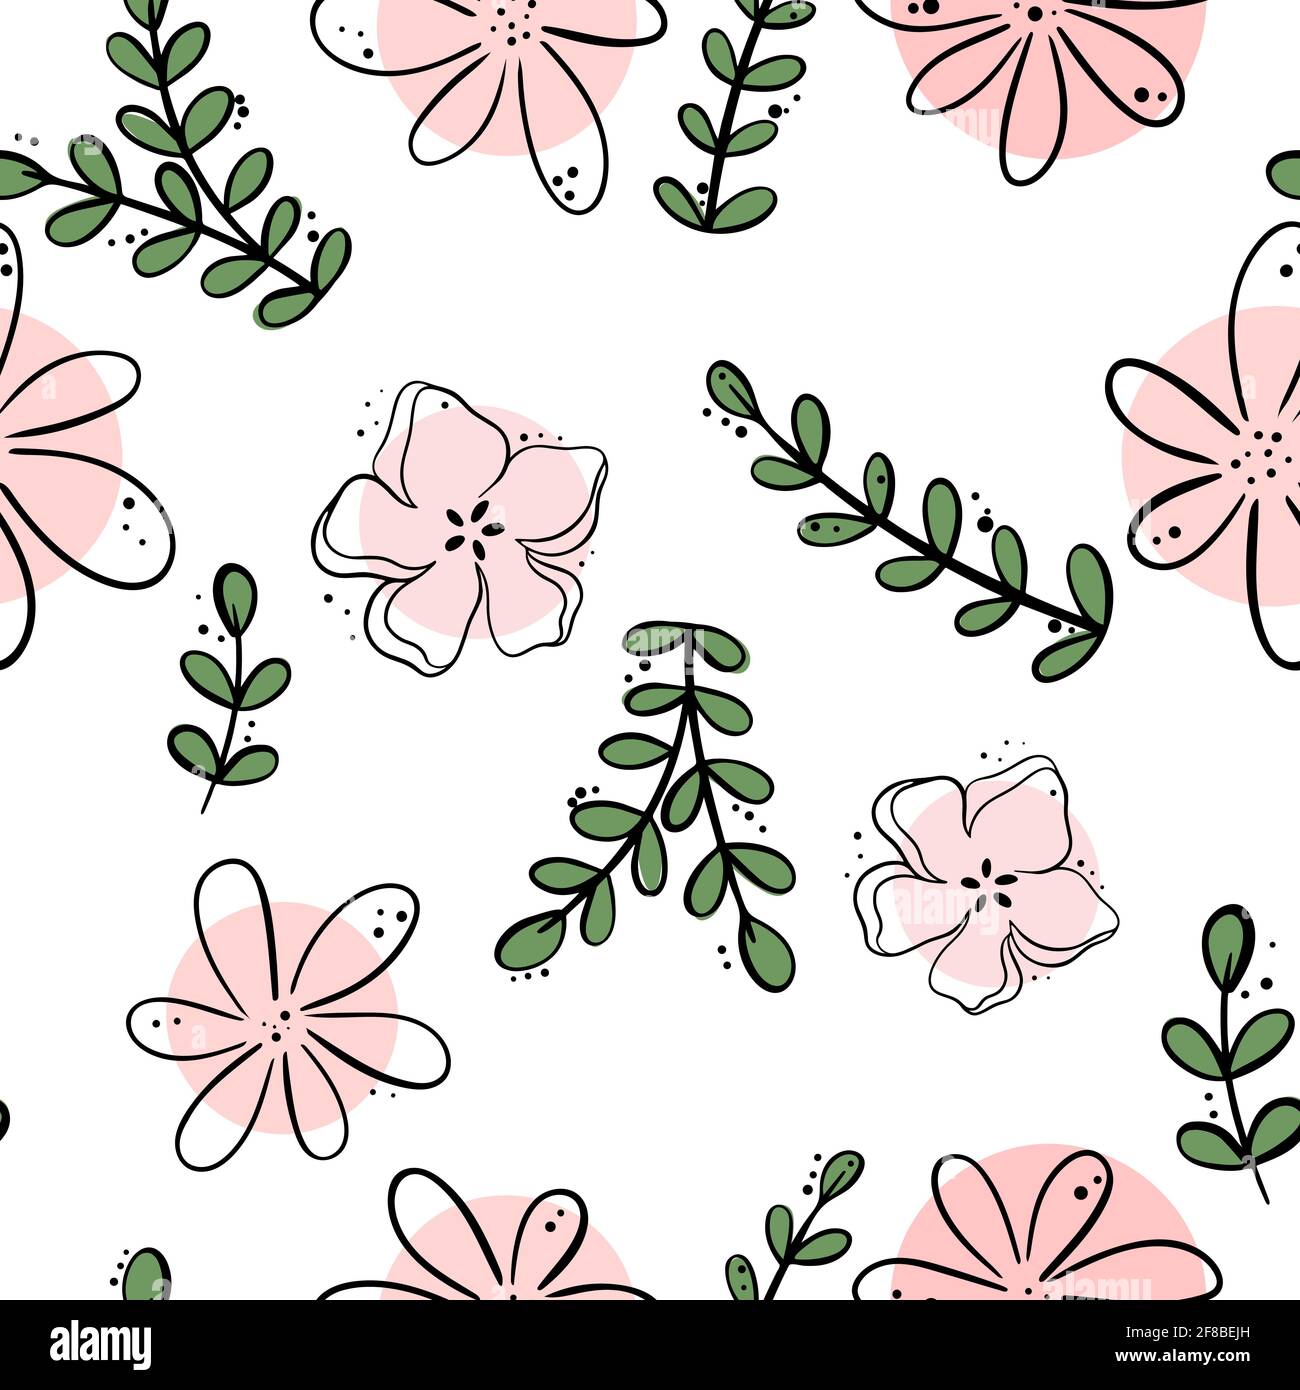 Floral pattern. Solid pattern with flowers, leaves and branches. Simple floral background for packaging and interior design.Vector. Stock Vector